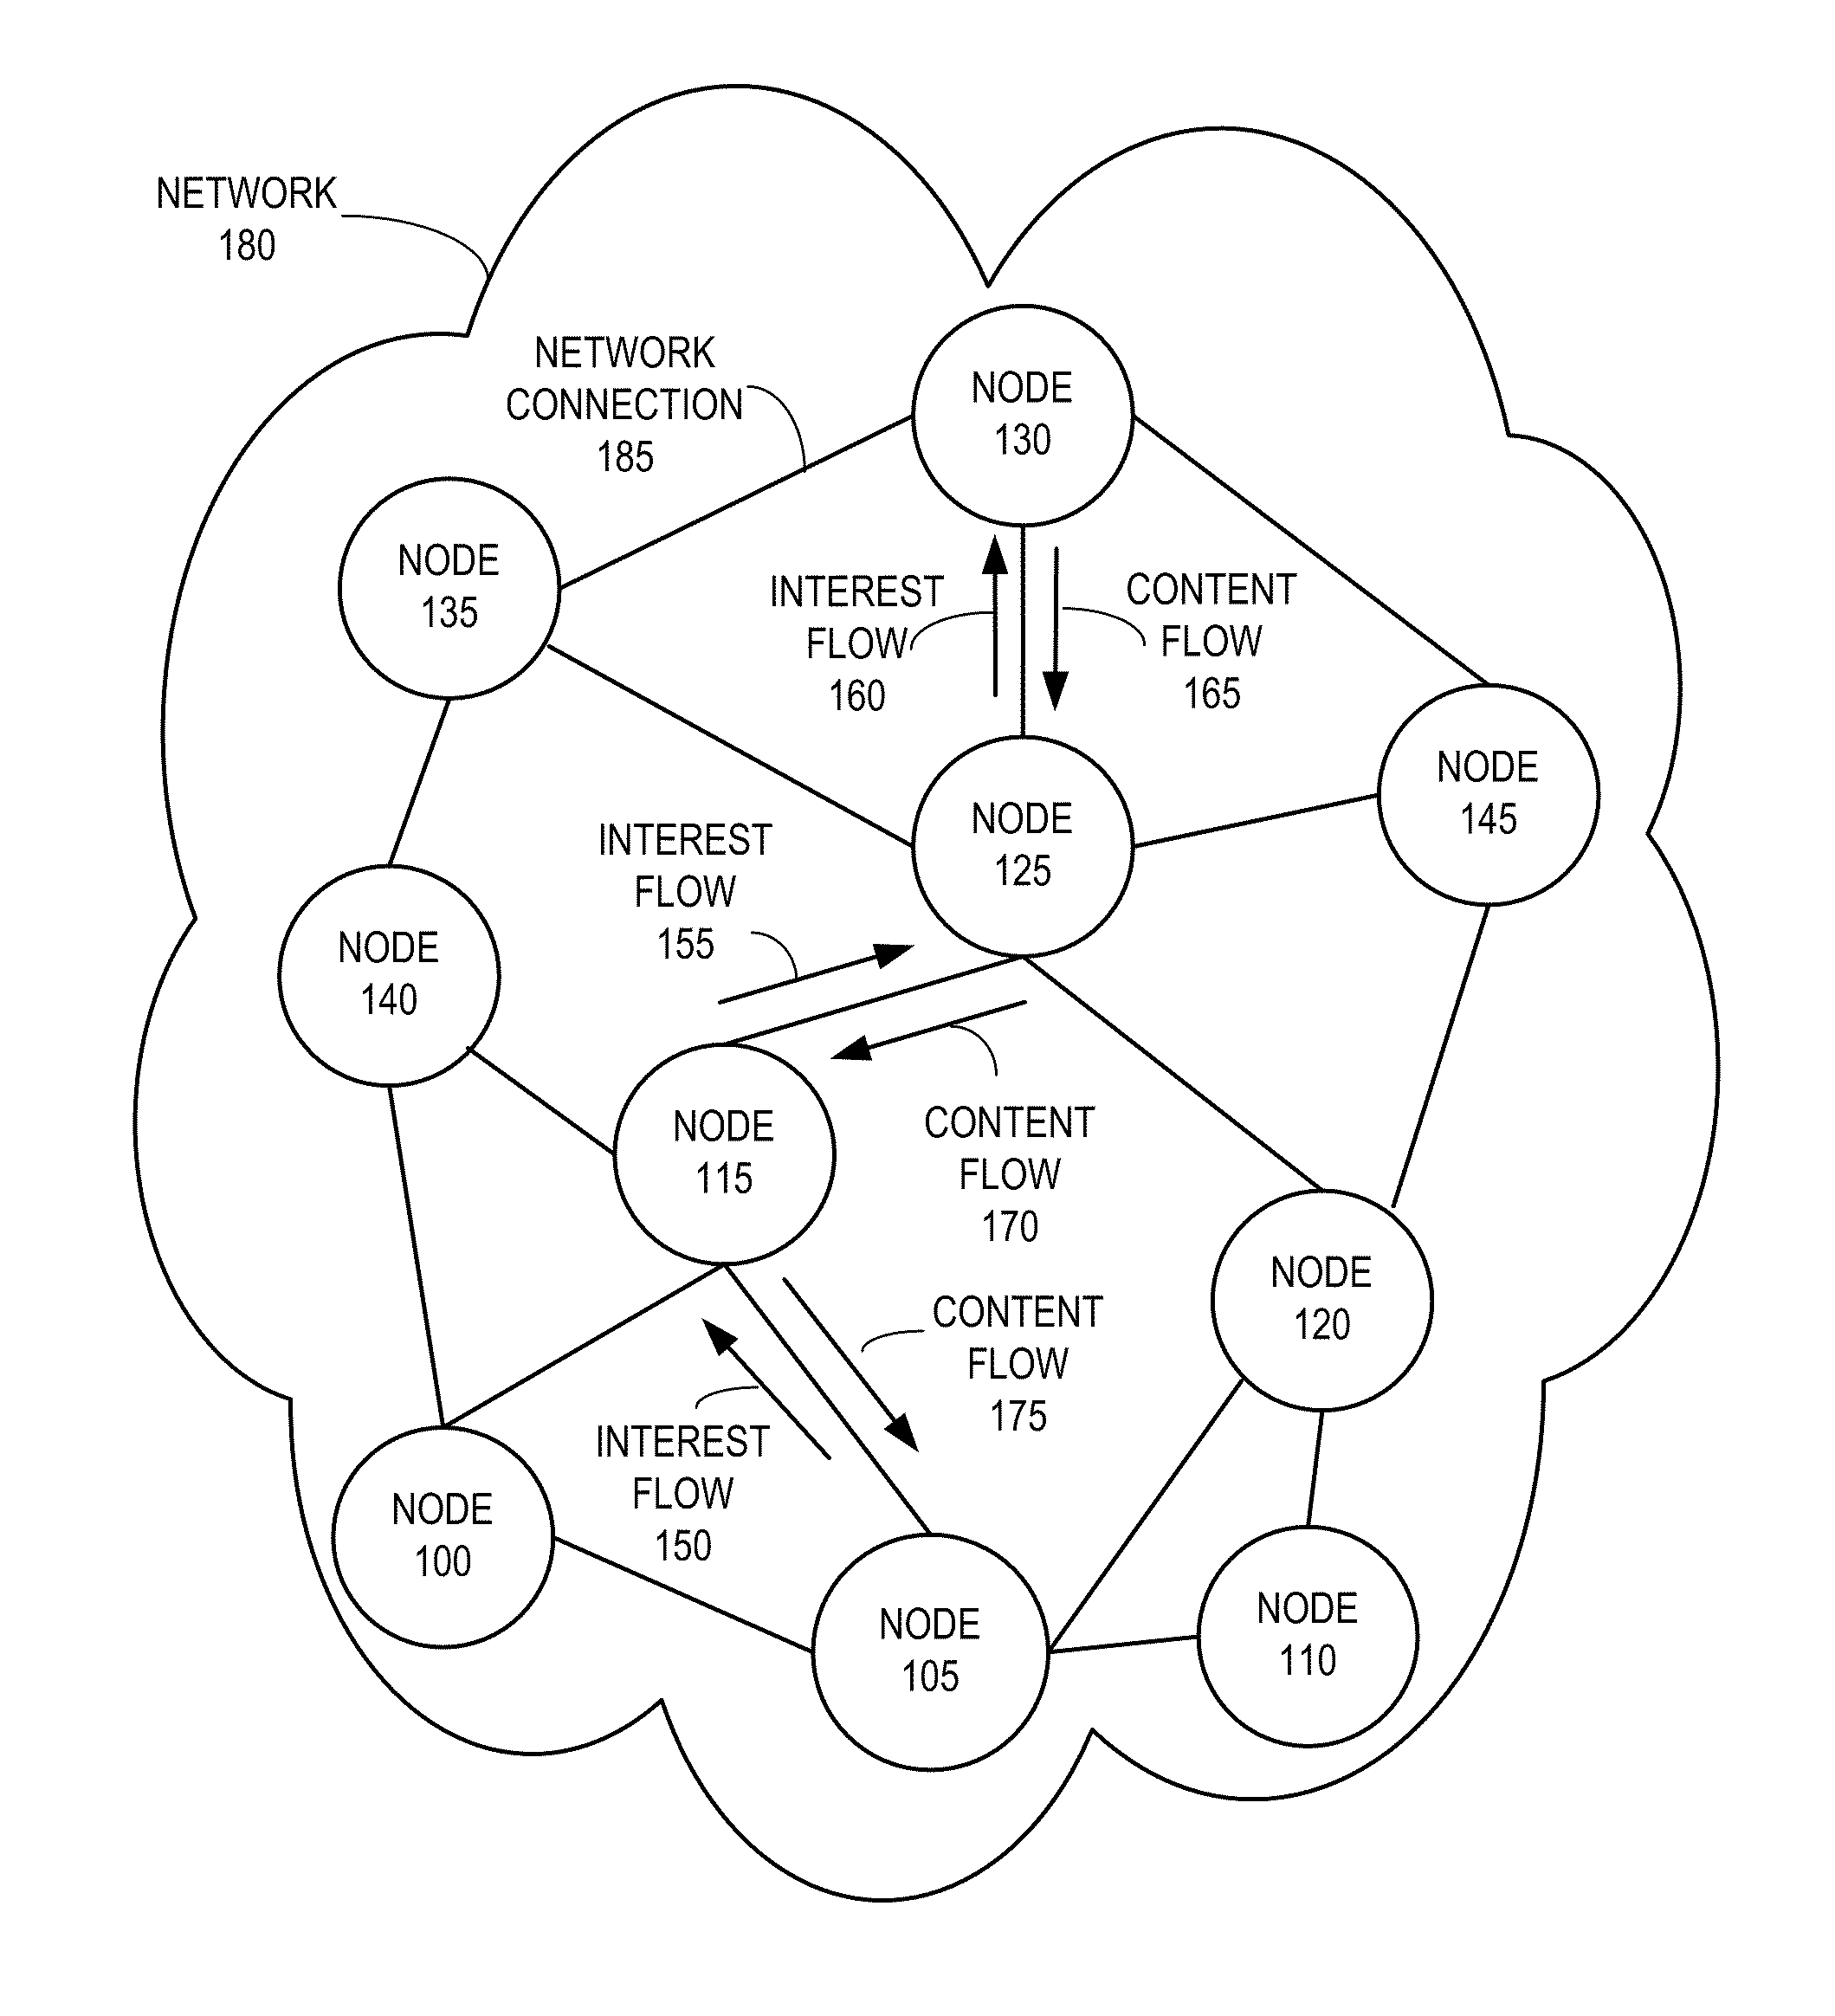 Adaptive multi-interface use for content networking